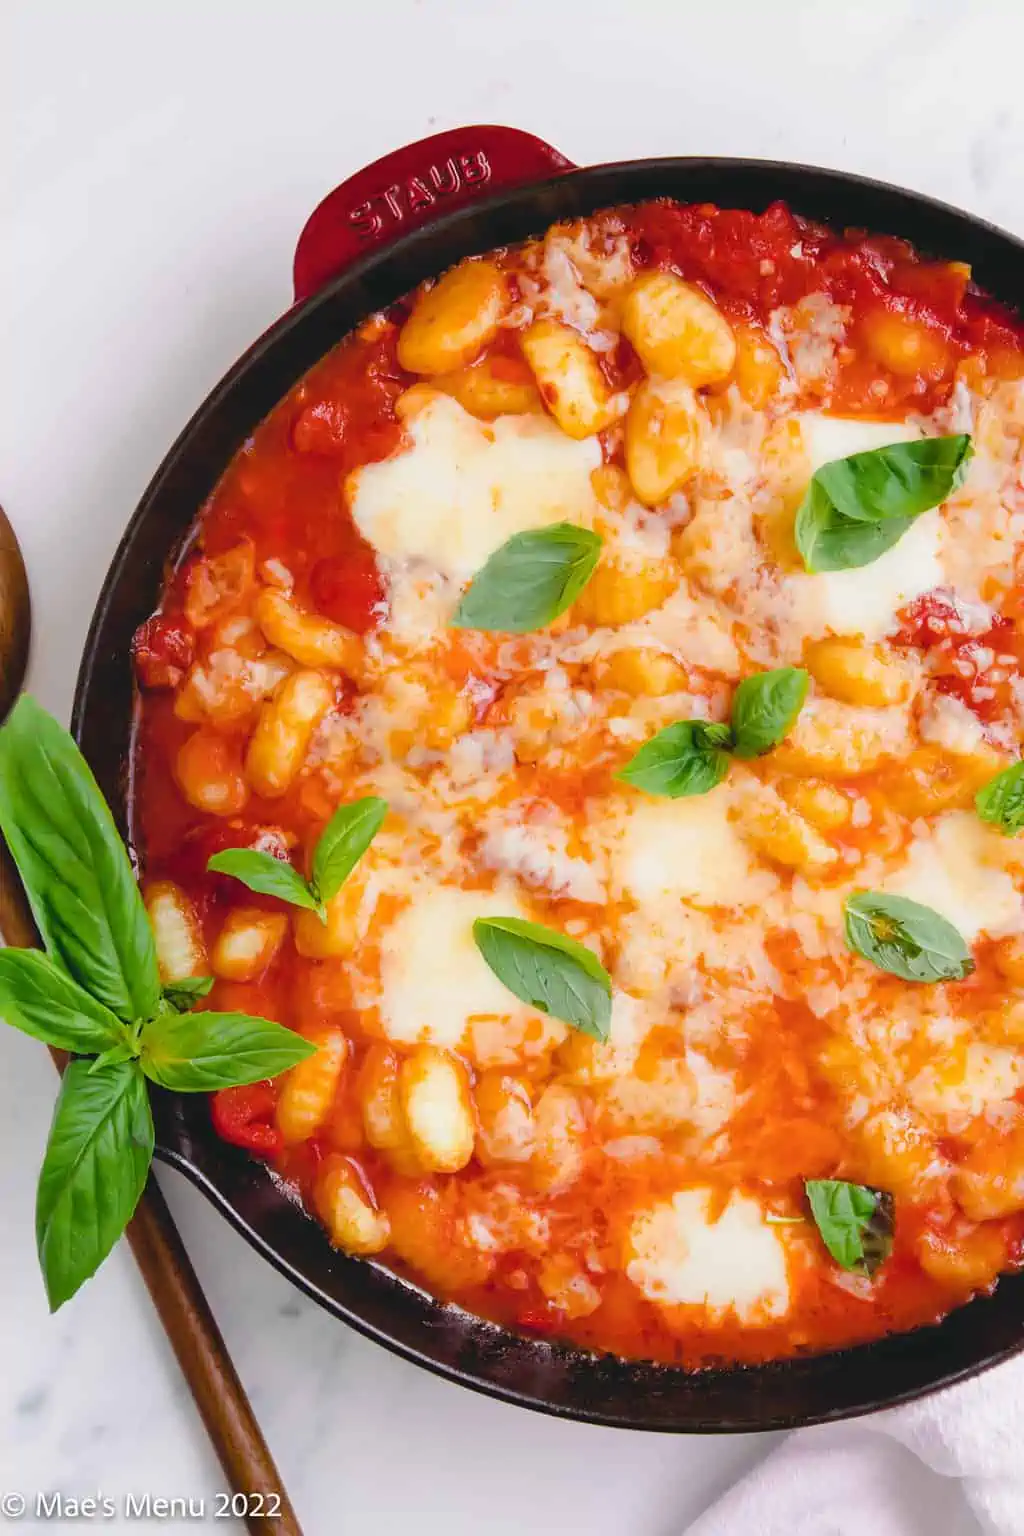 Gnocchi al forno in a skillet surrounded by fresh basil.